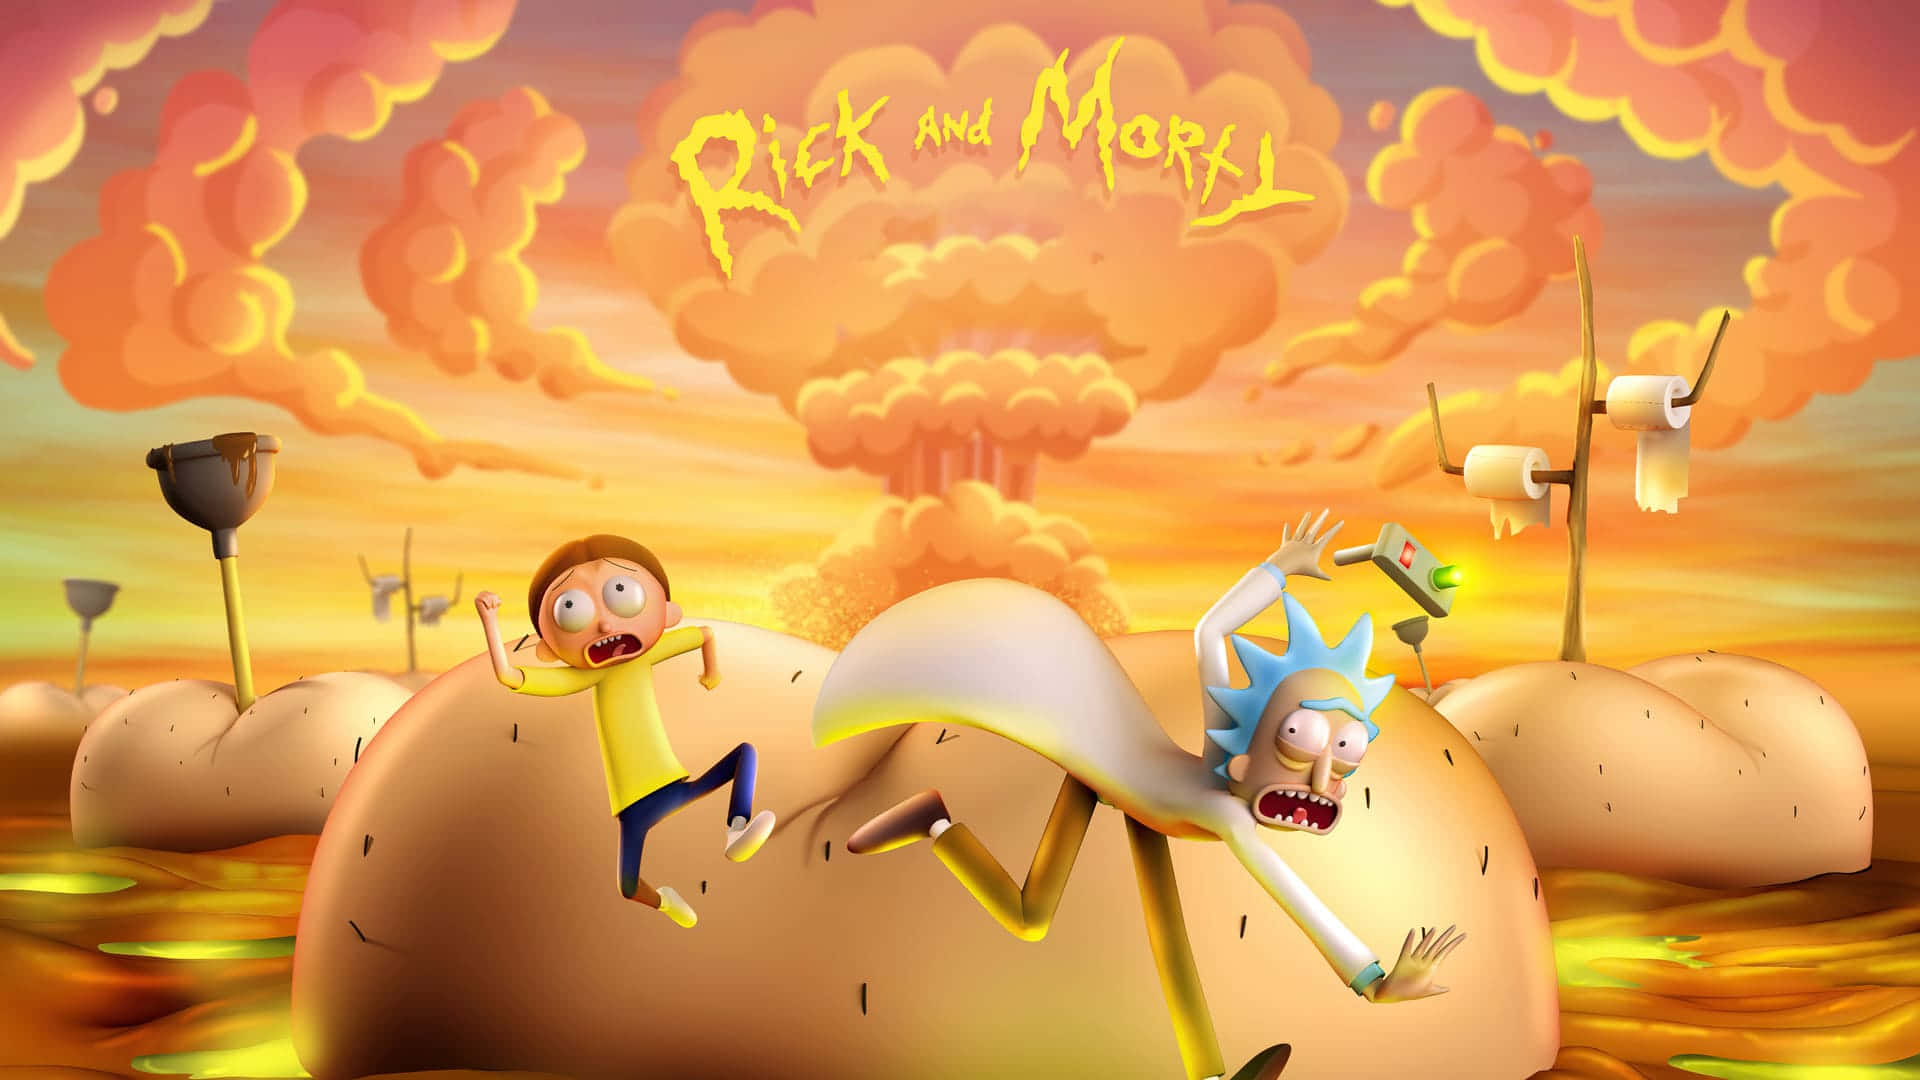 Image  A Rick and Morty laptop with a colorful cartoon theme Wallpaper